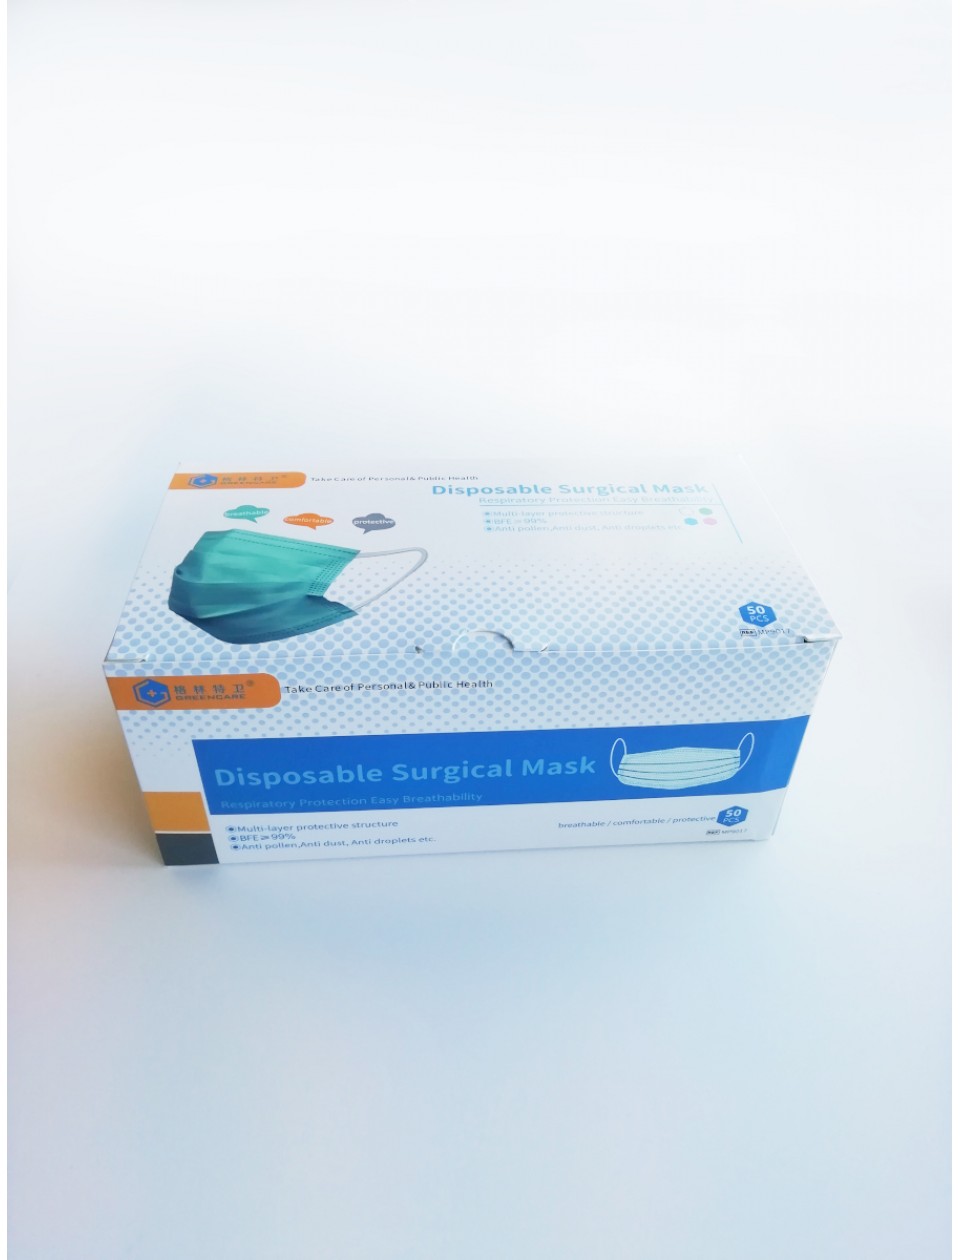 Download 3 Layer Surgical Mask box of 50 The Type IIR face mask is ...